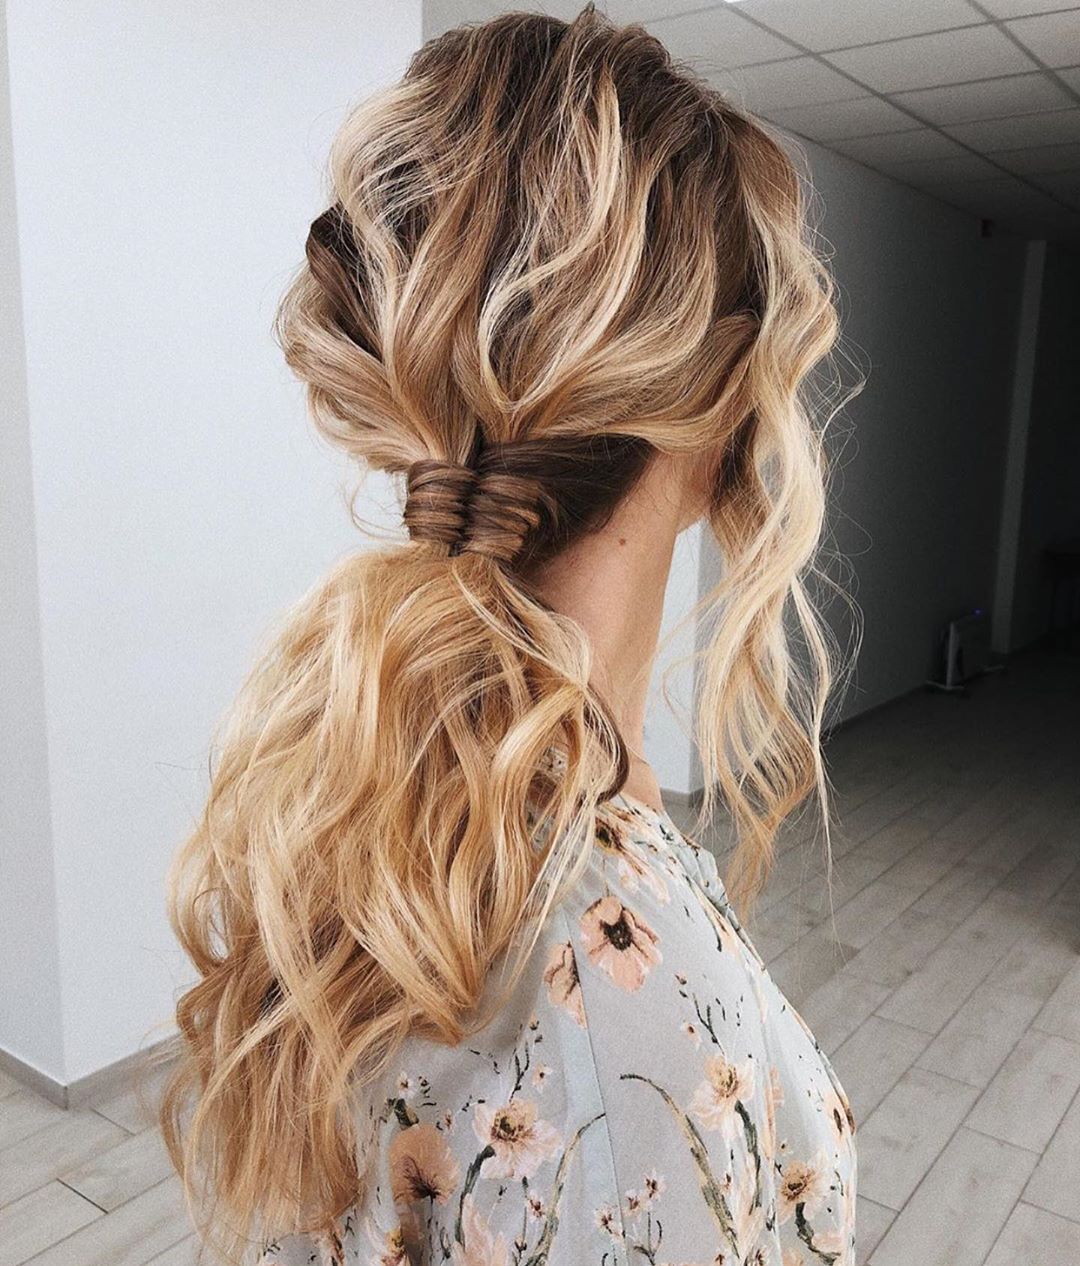 Trendy Braided Hairstyles in Summer - Ponytail Hairstyles for Long Hair